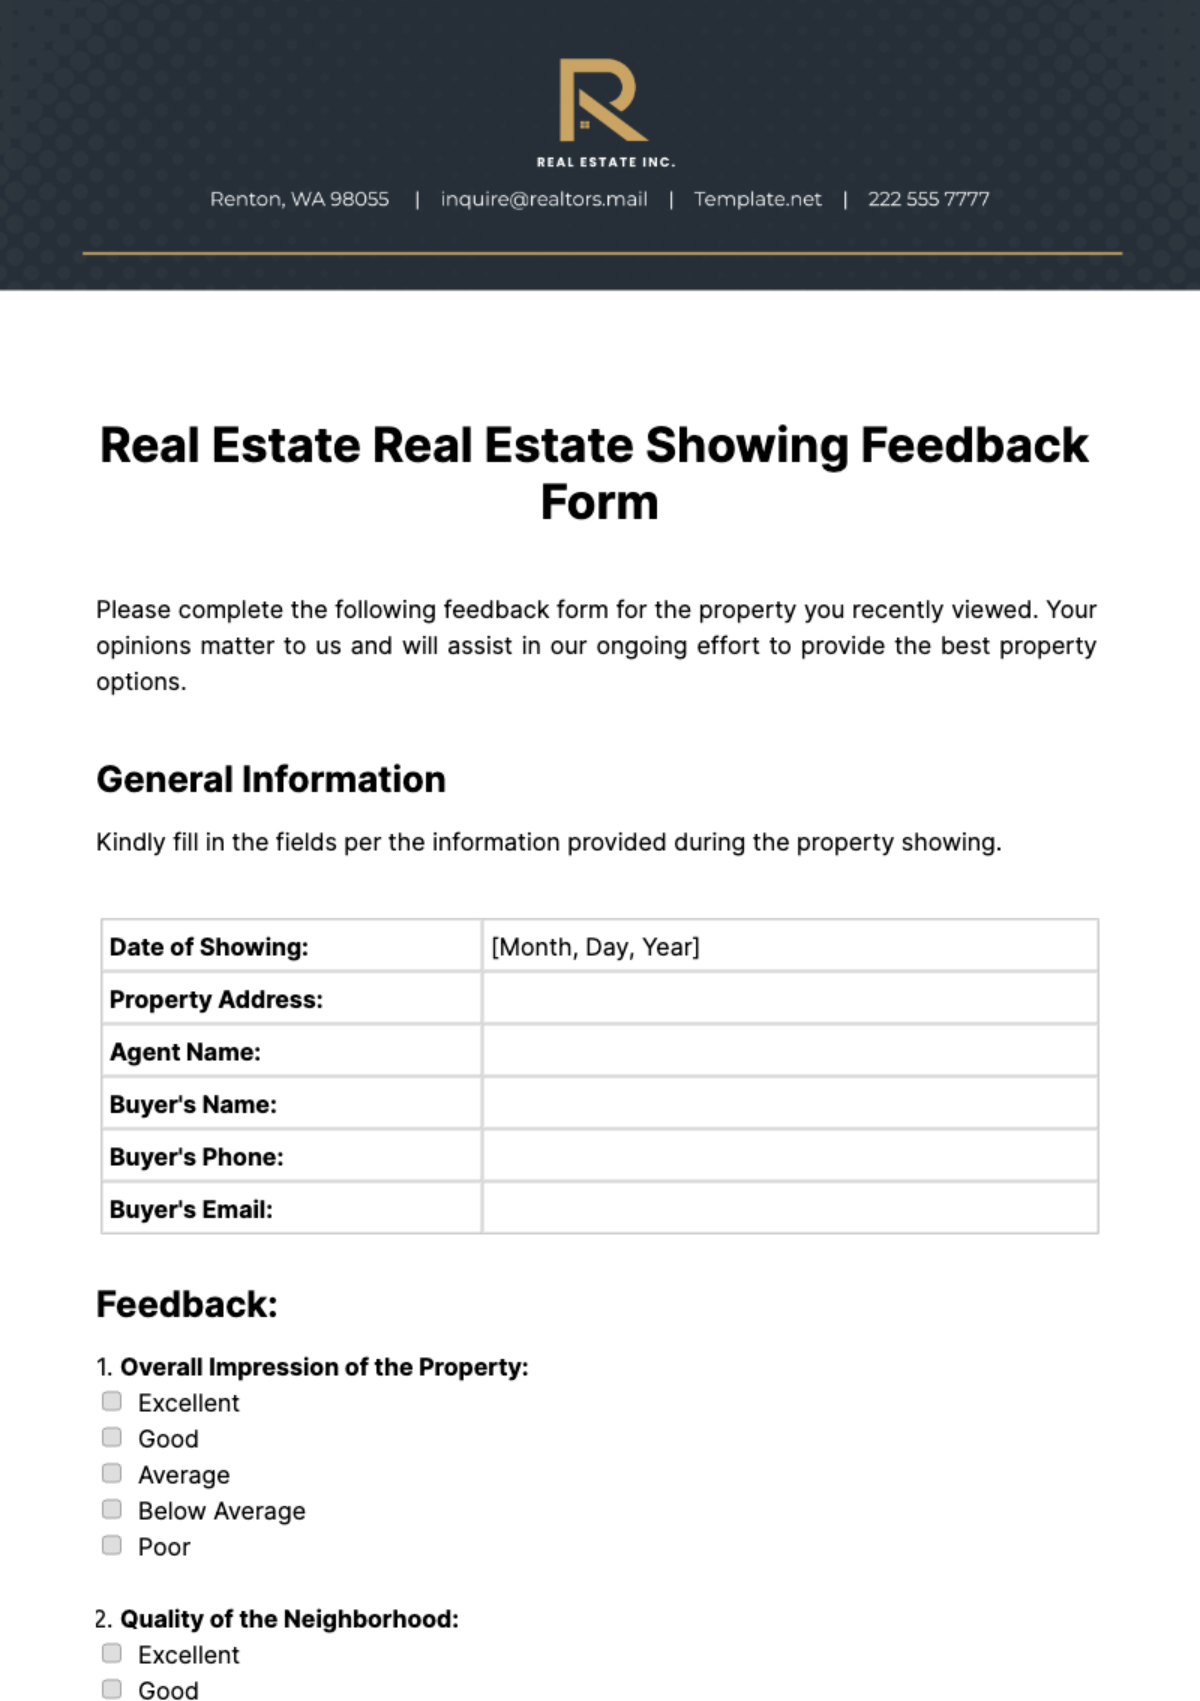 Real Estate Real Estate Showing Feedback Form Template